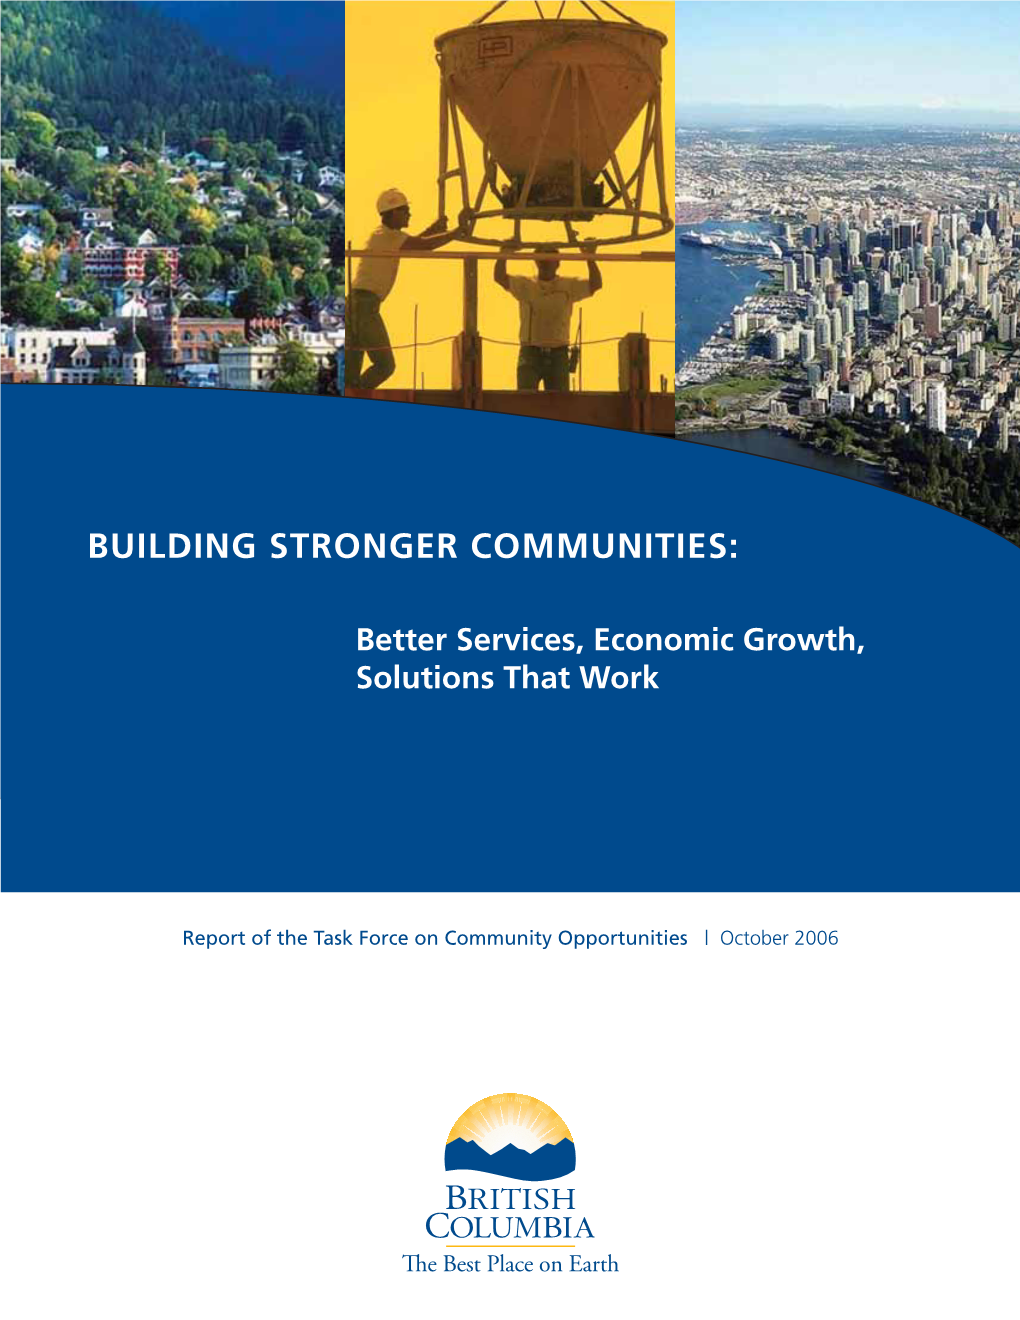 BUILDING STRONGER COMMUNITIES: Better Services, Economic Growth, Solutions That Work | I 1